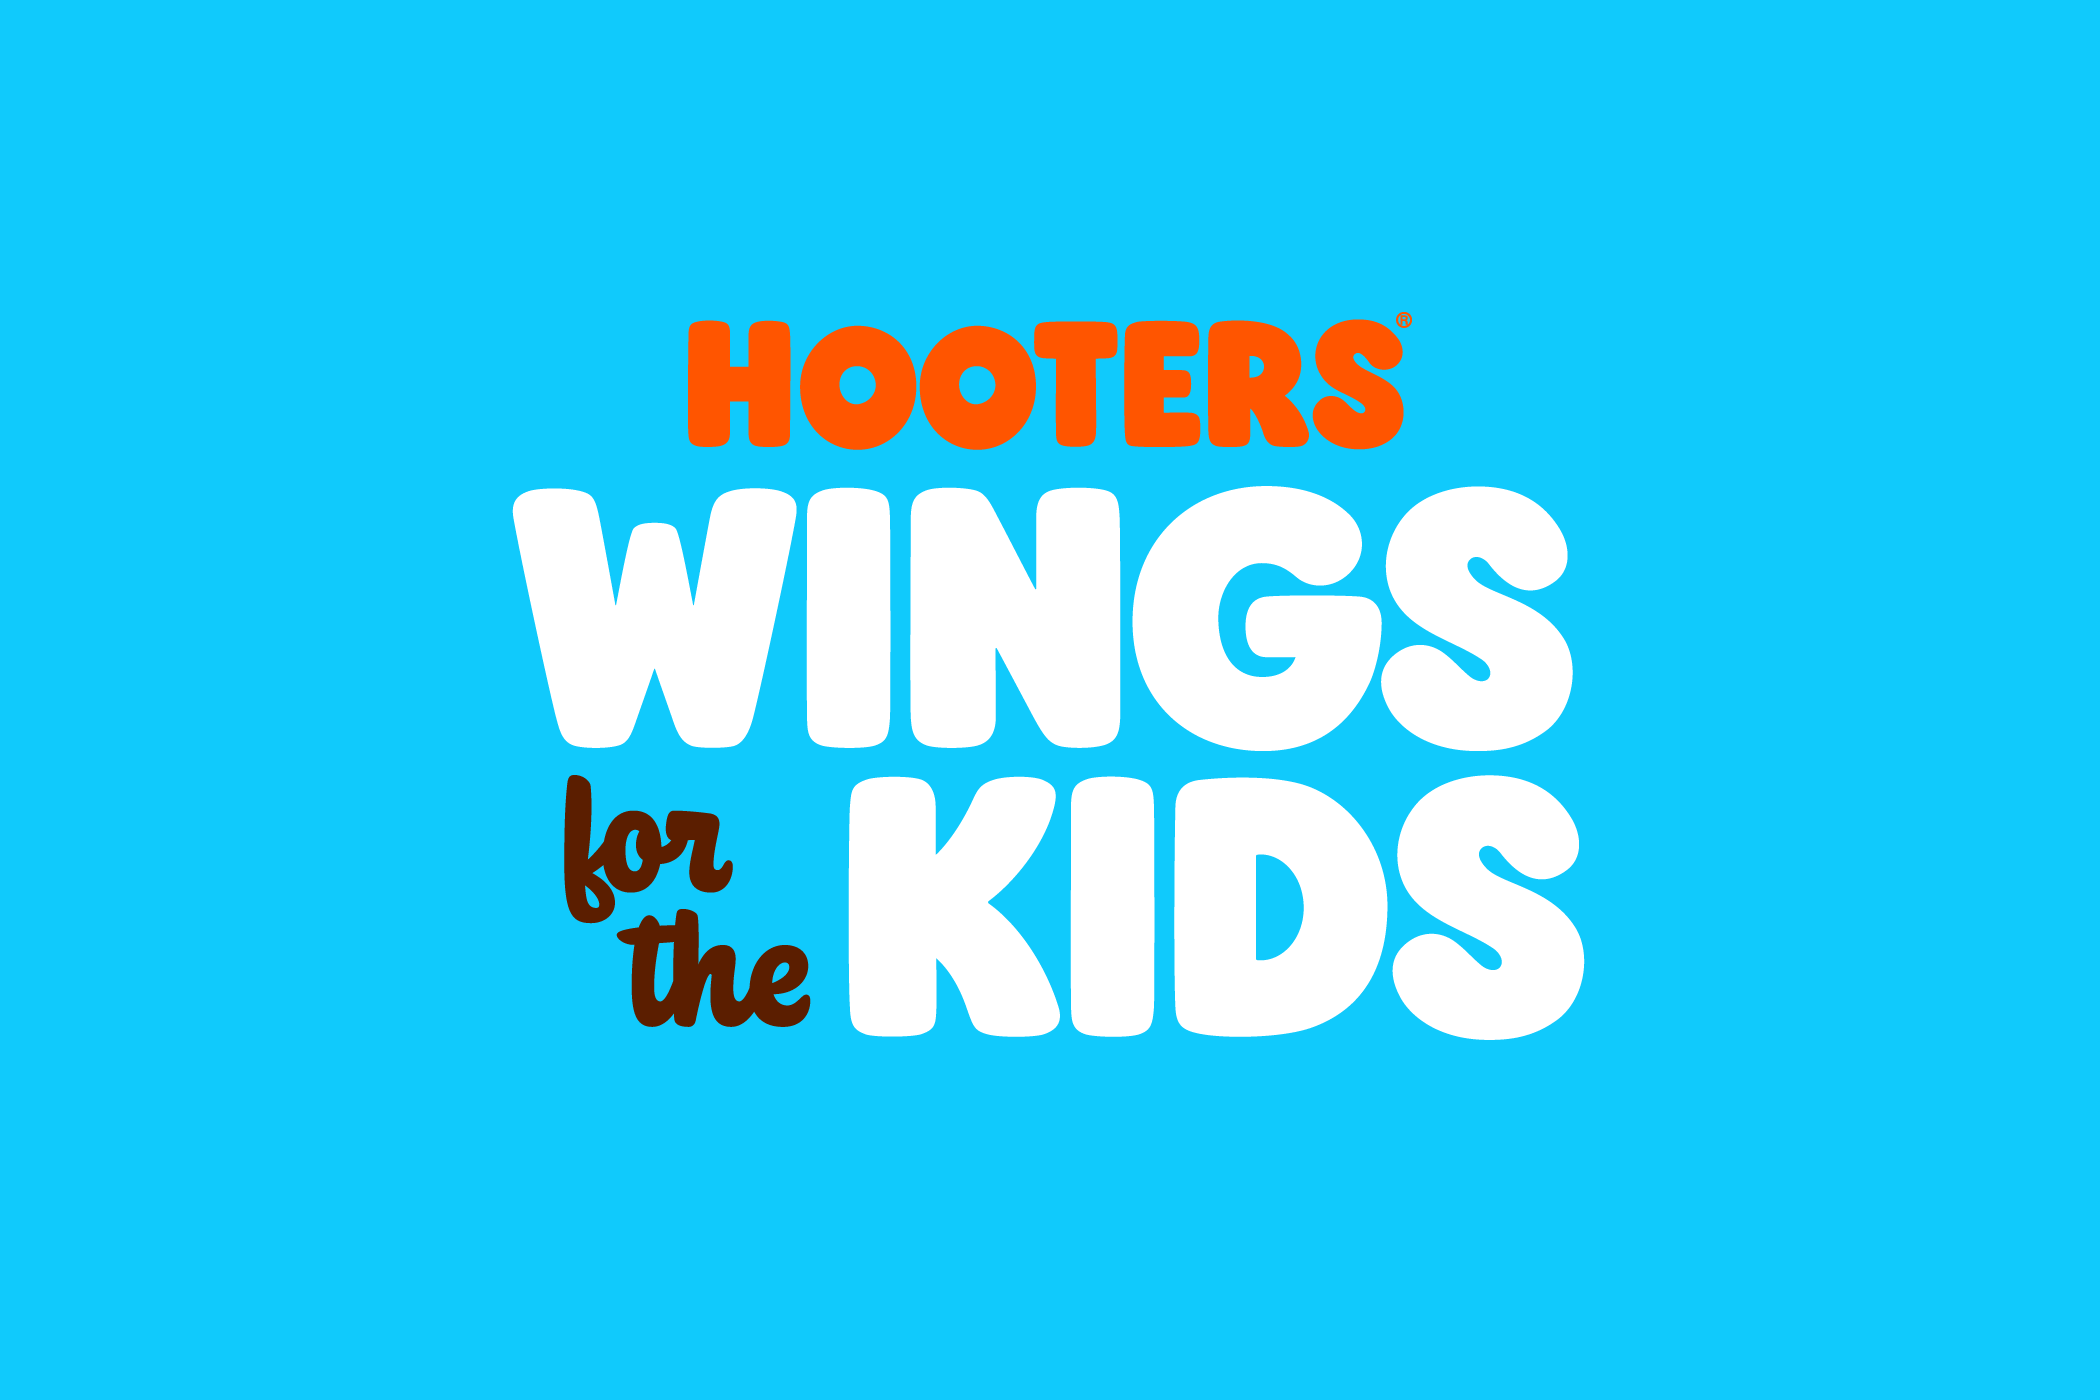 Hooters Wings for the Kids